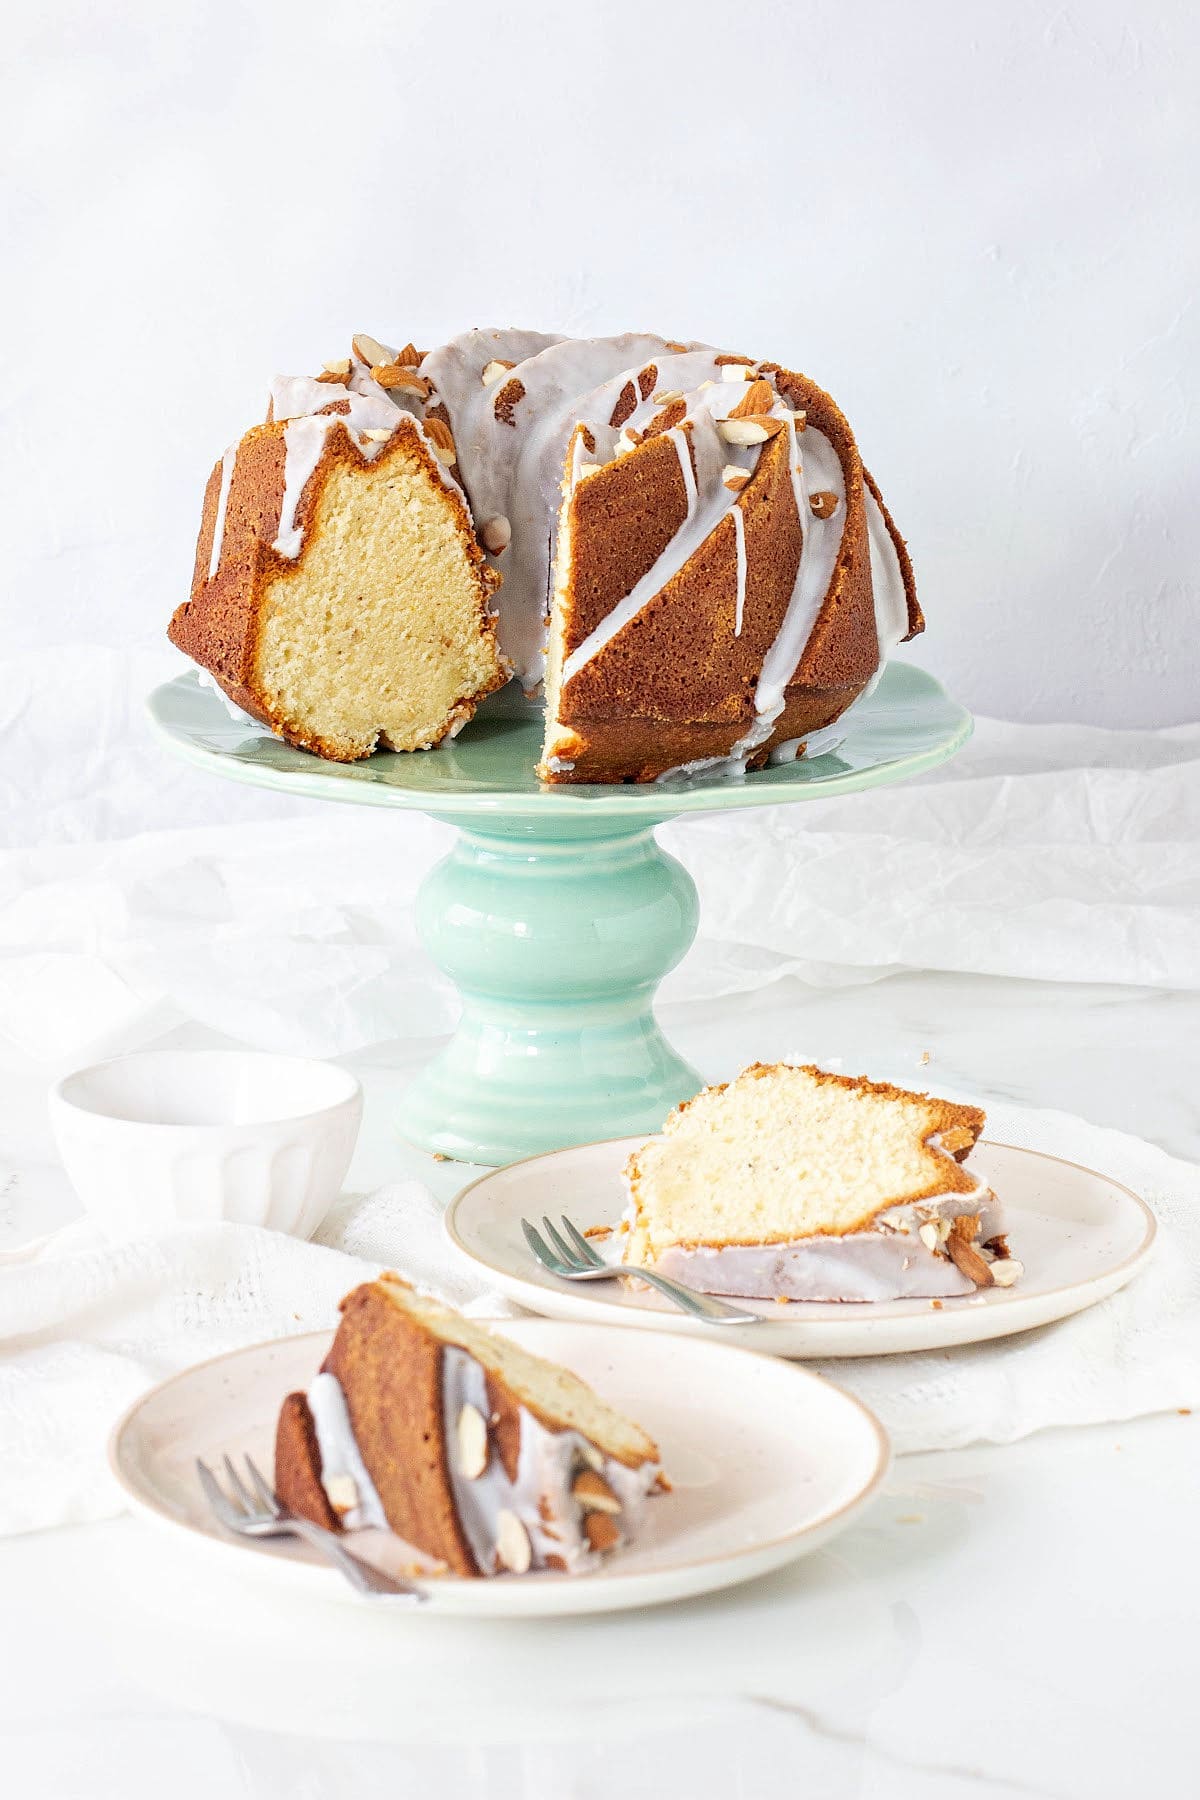 Green cake stand with glazed almond bundt cake. Two slices on plates, white background.